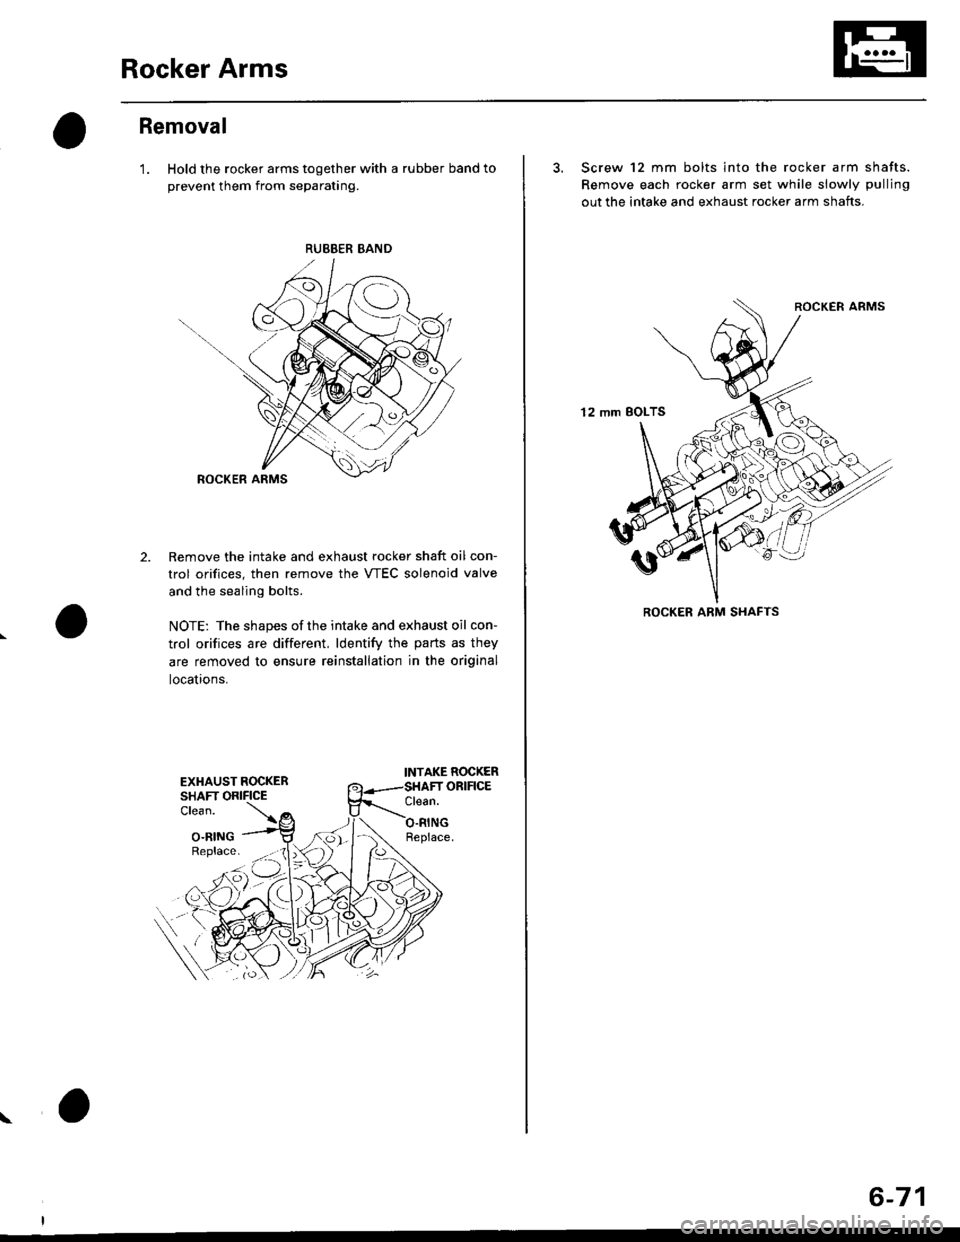 HONDA CIVIC 1999 6.G Owners Manual Rocker Arms
Removal
1. Hold the rocker arms together with a rubber band to
prevent them from separating.
Remove the intake and exhaust rocker shaft oil con-
trol orifices, then remove the VTEC soleno